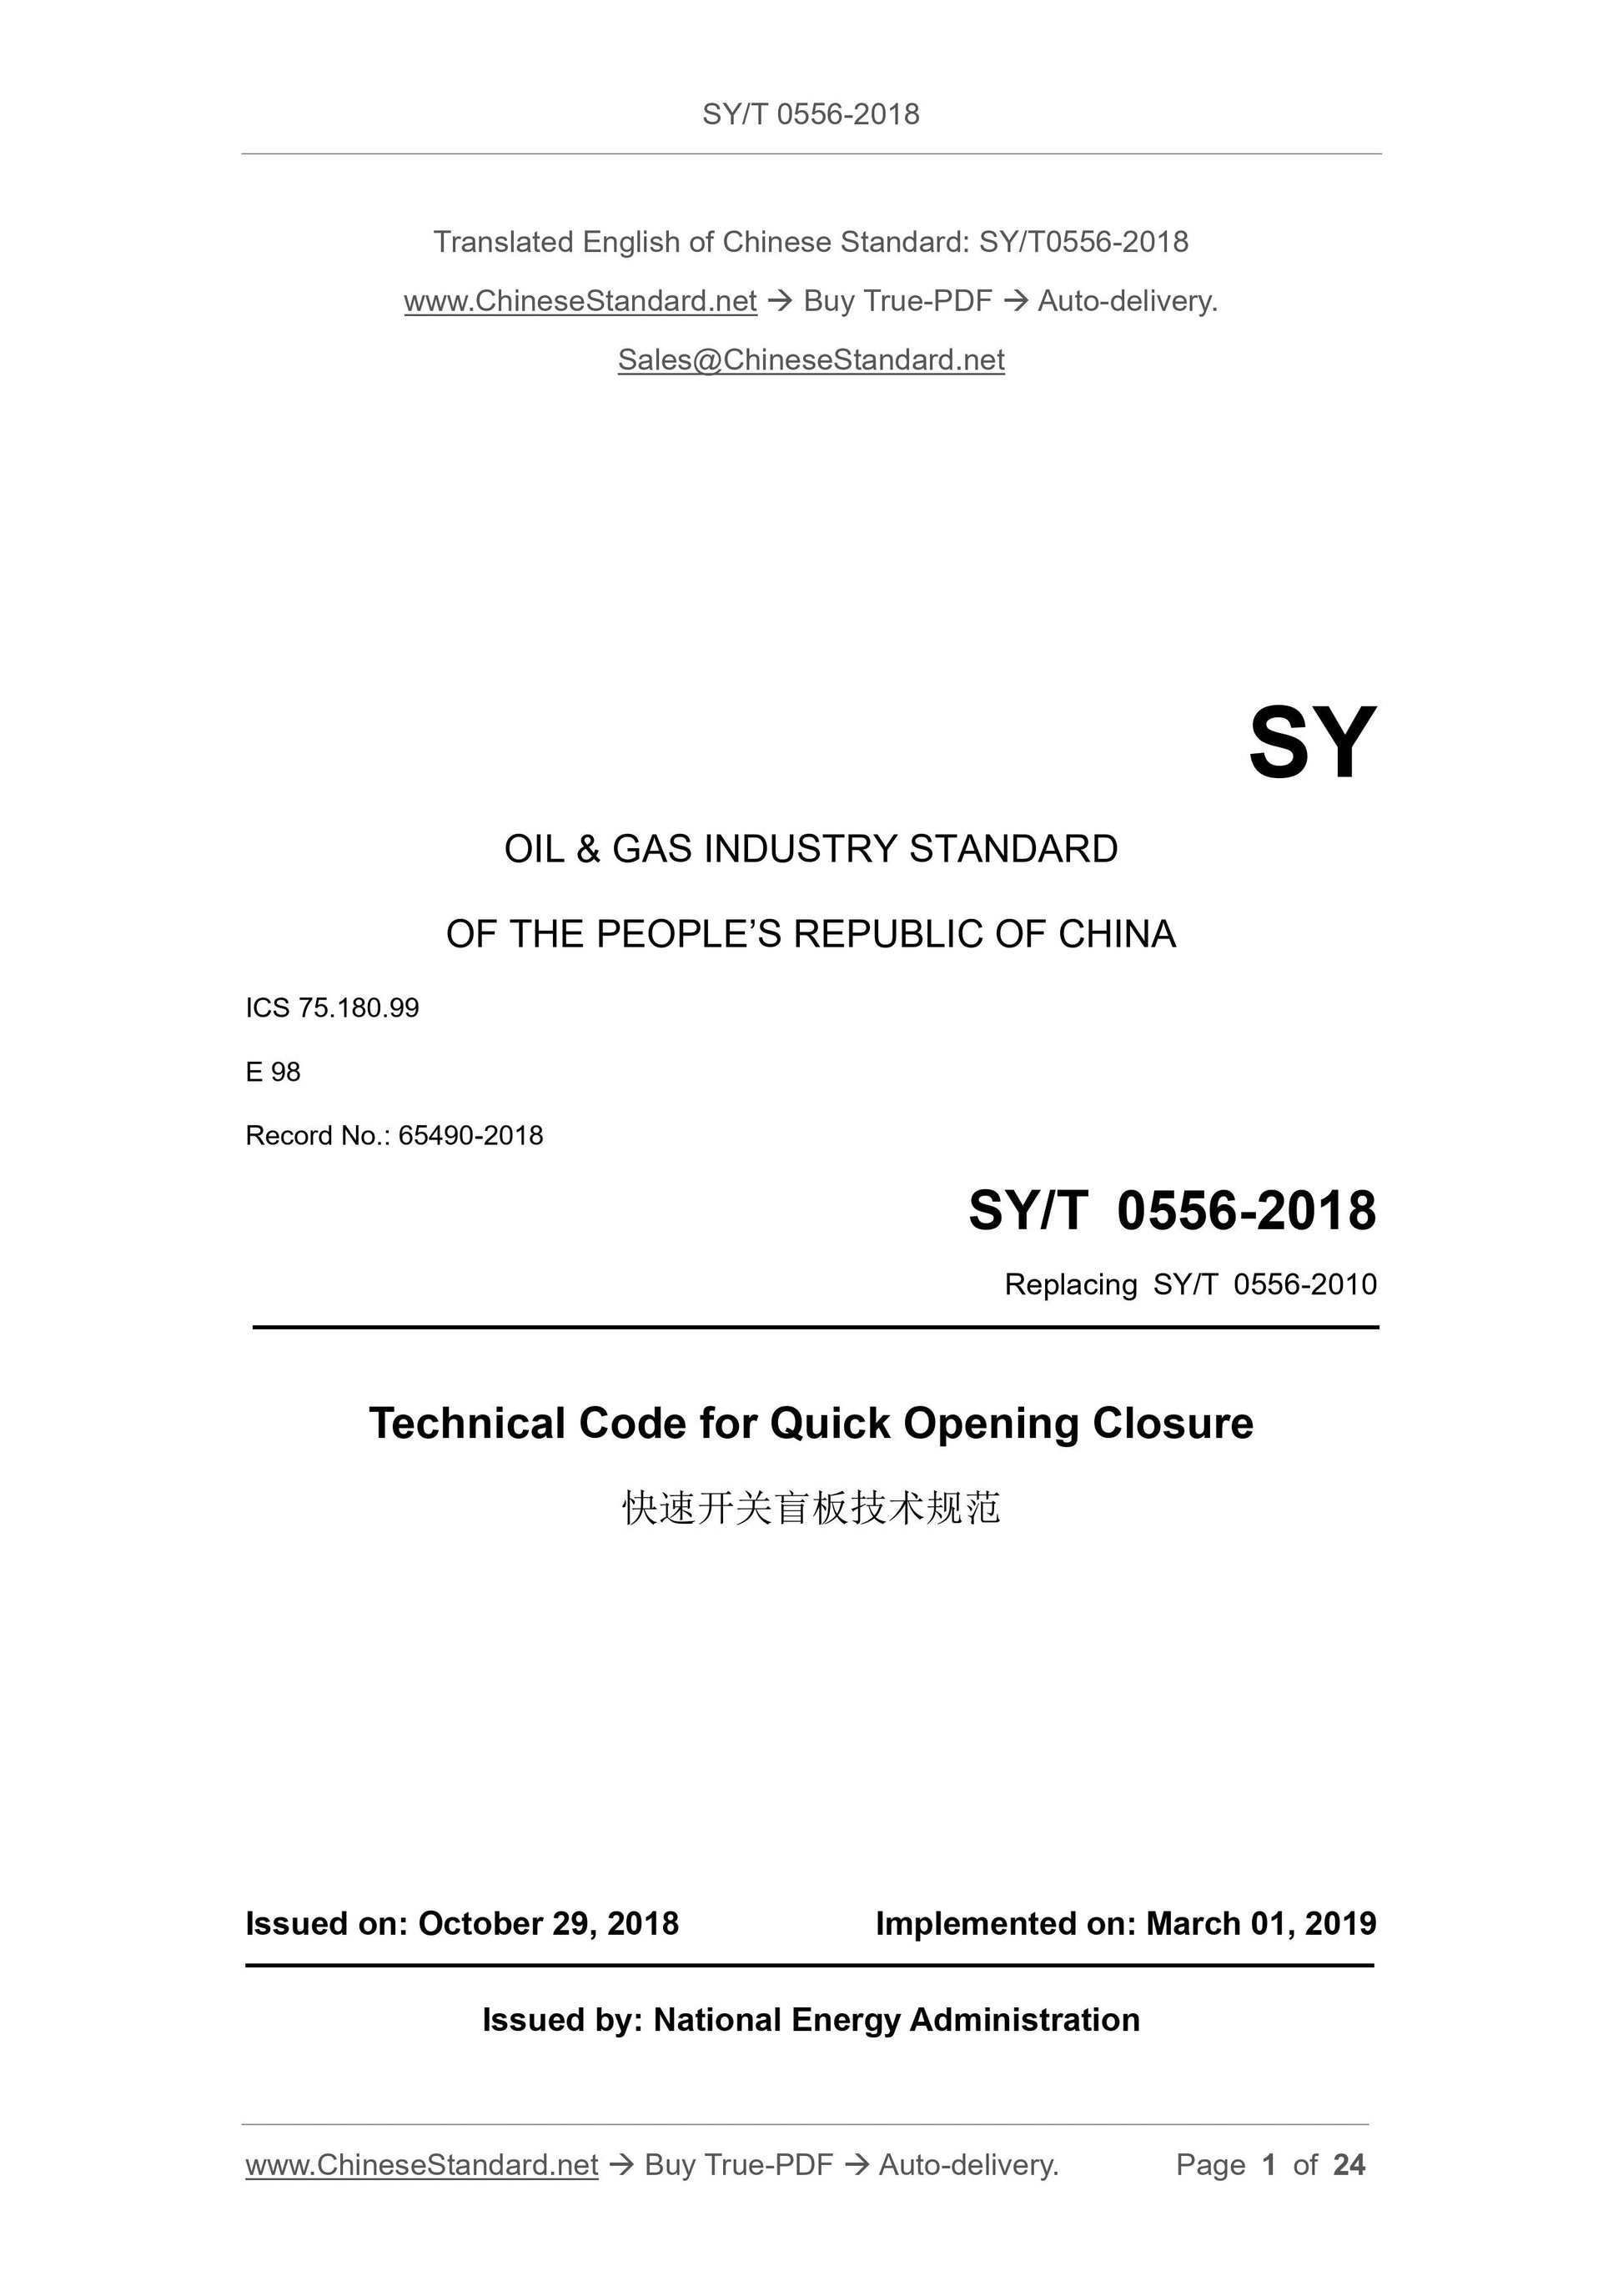 SY/T 0556-2018 Page 1